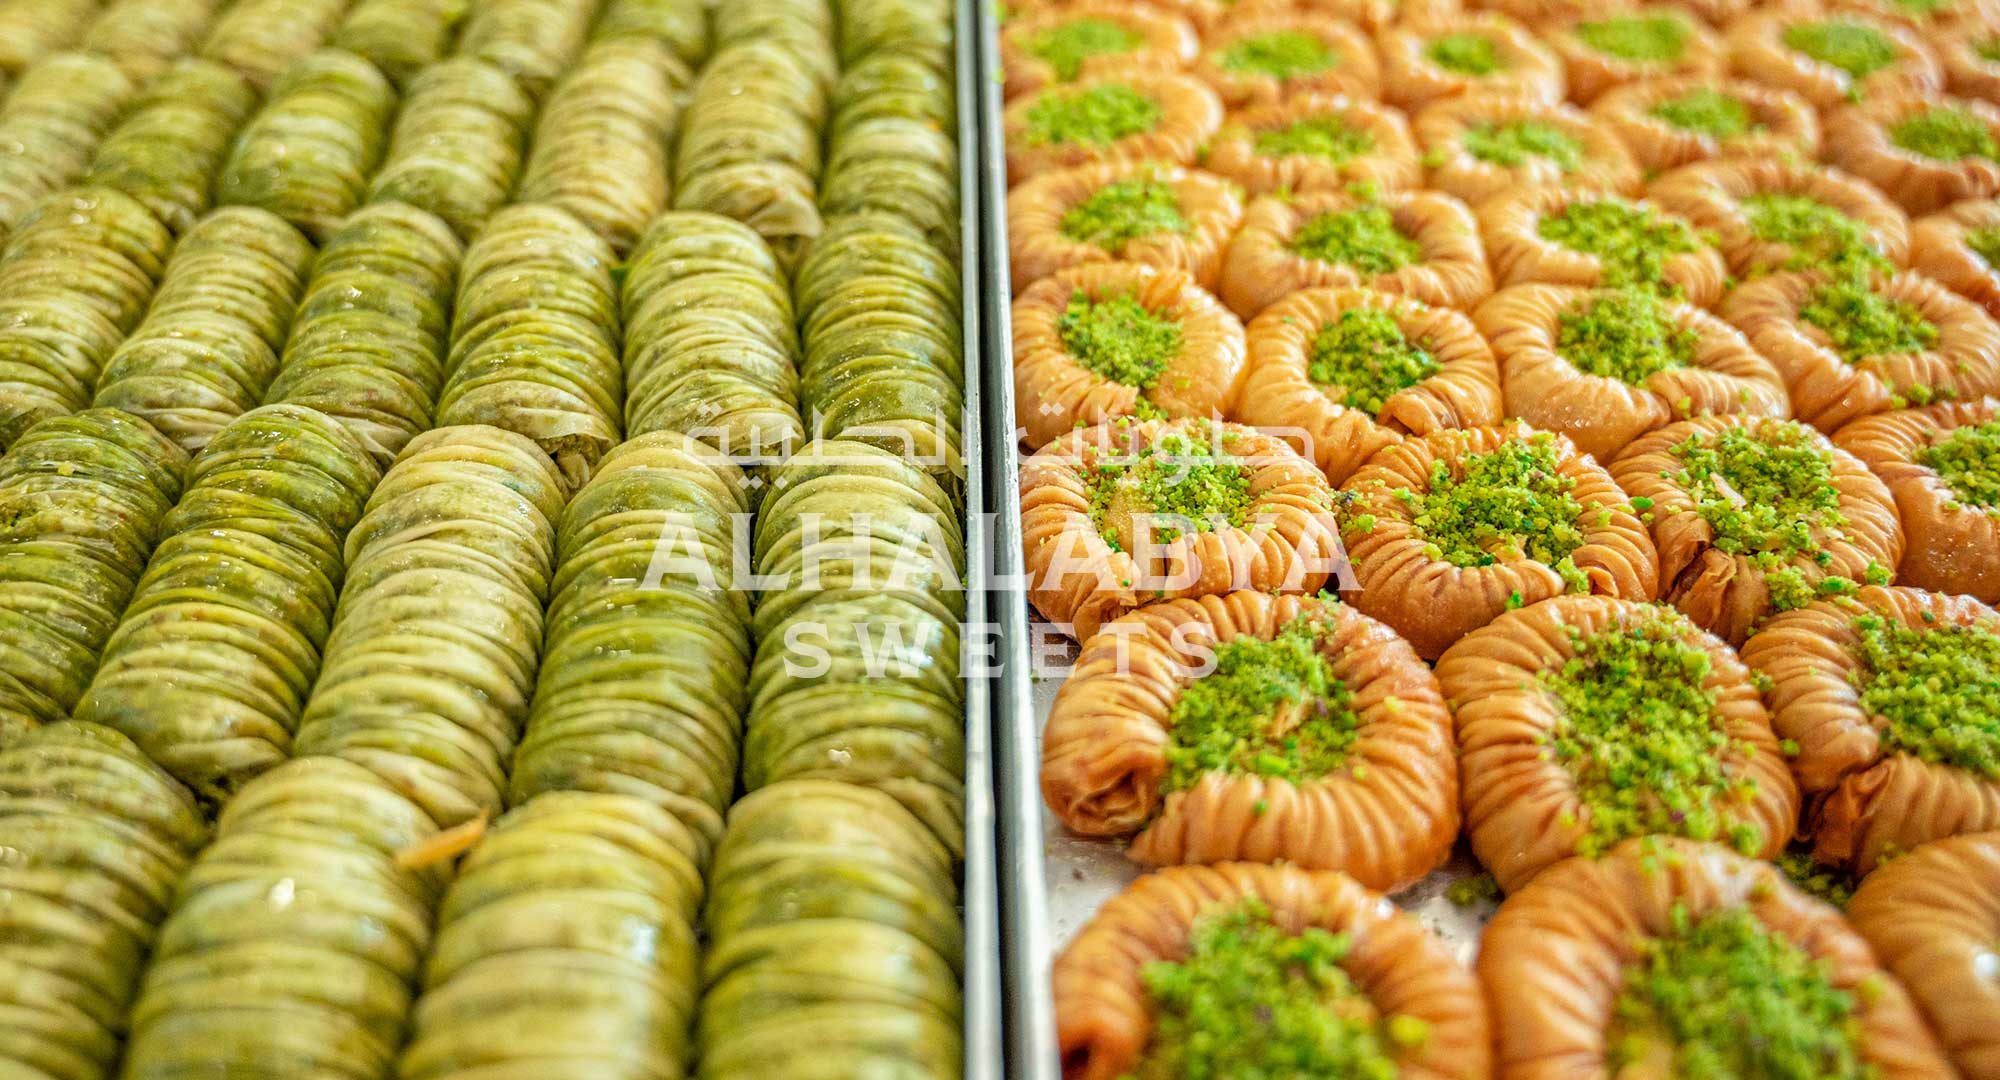 Pairing Baklava with Other Traditional Beverages and Desserts